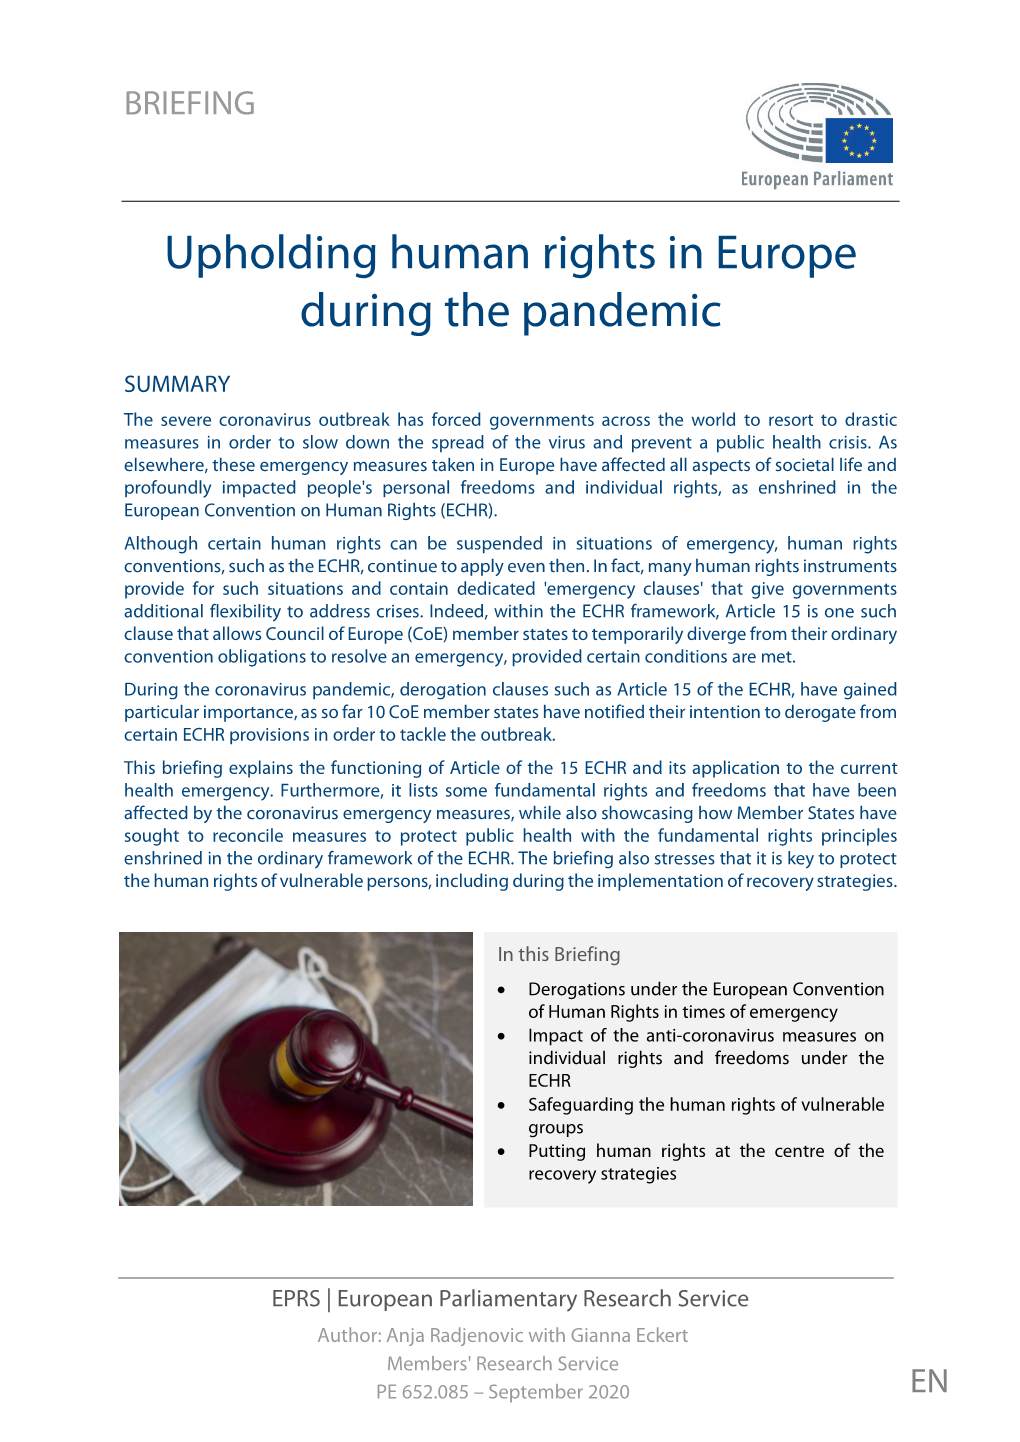 Upholding Human Rights in Europe During the Pandemic